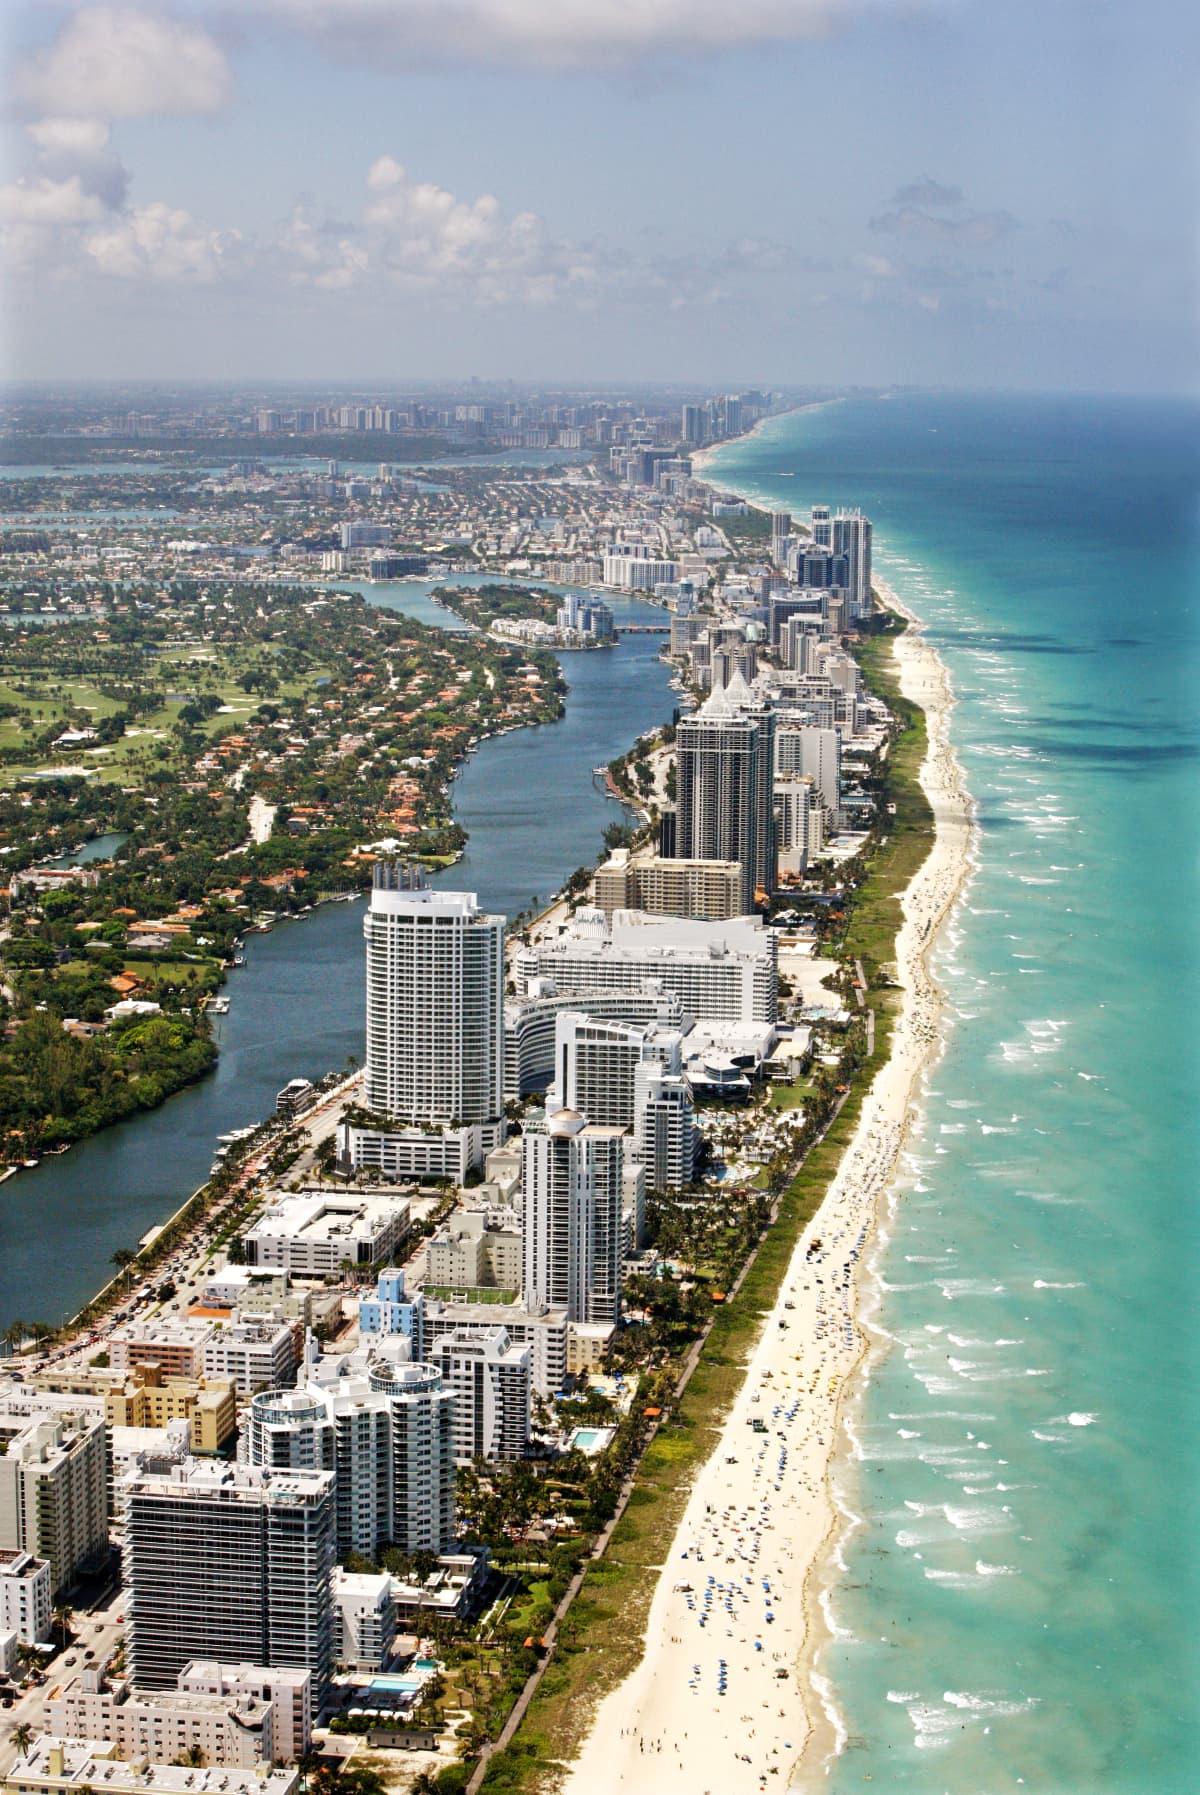 Miami beach coast with blue waters and miles of sandy beach